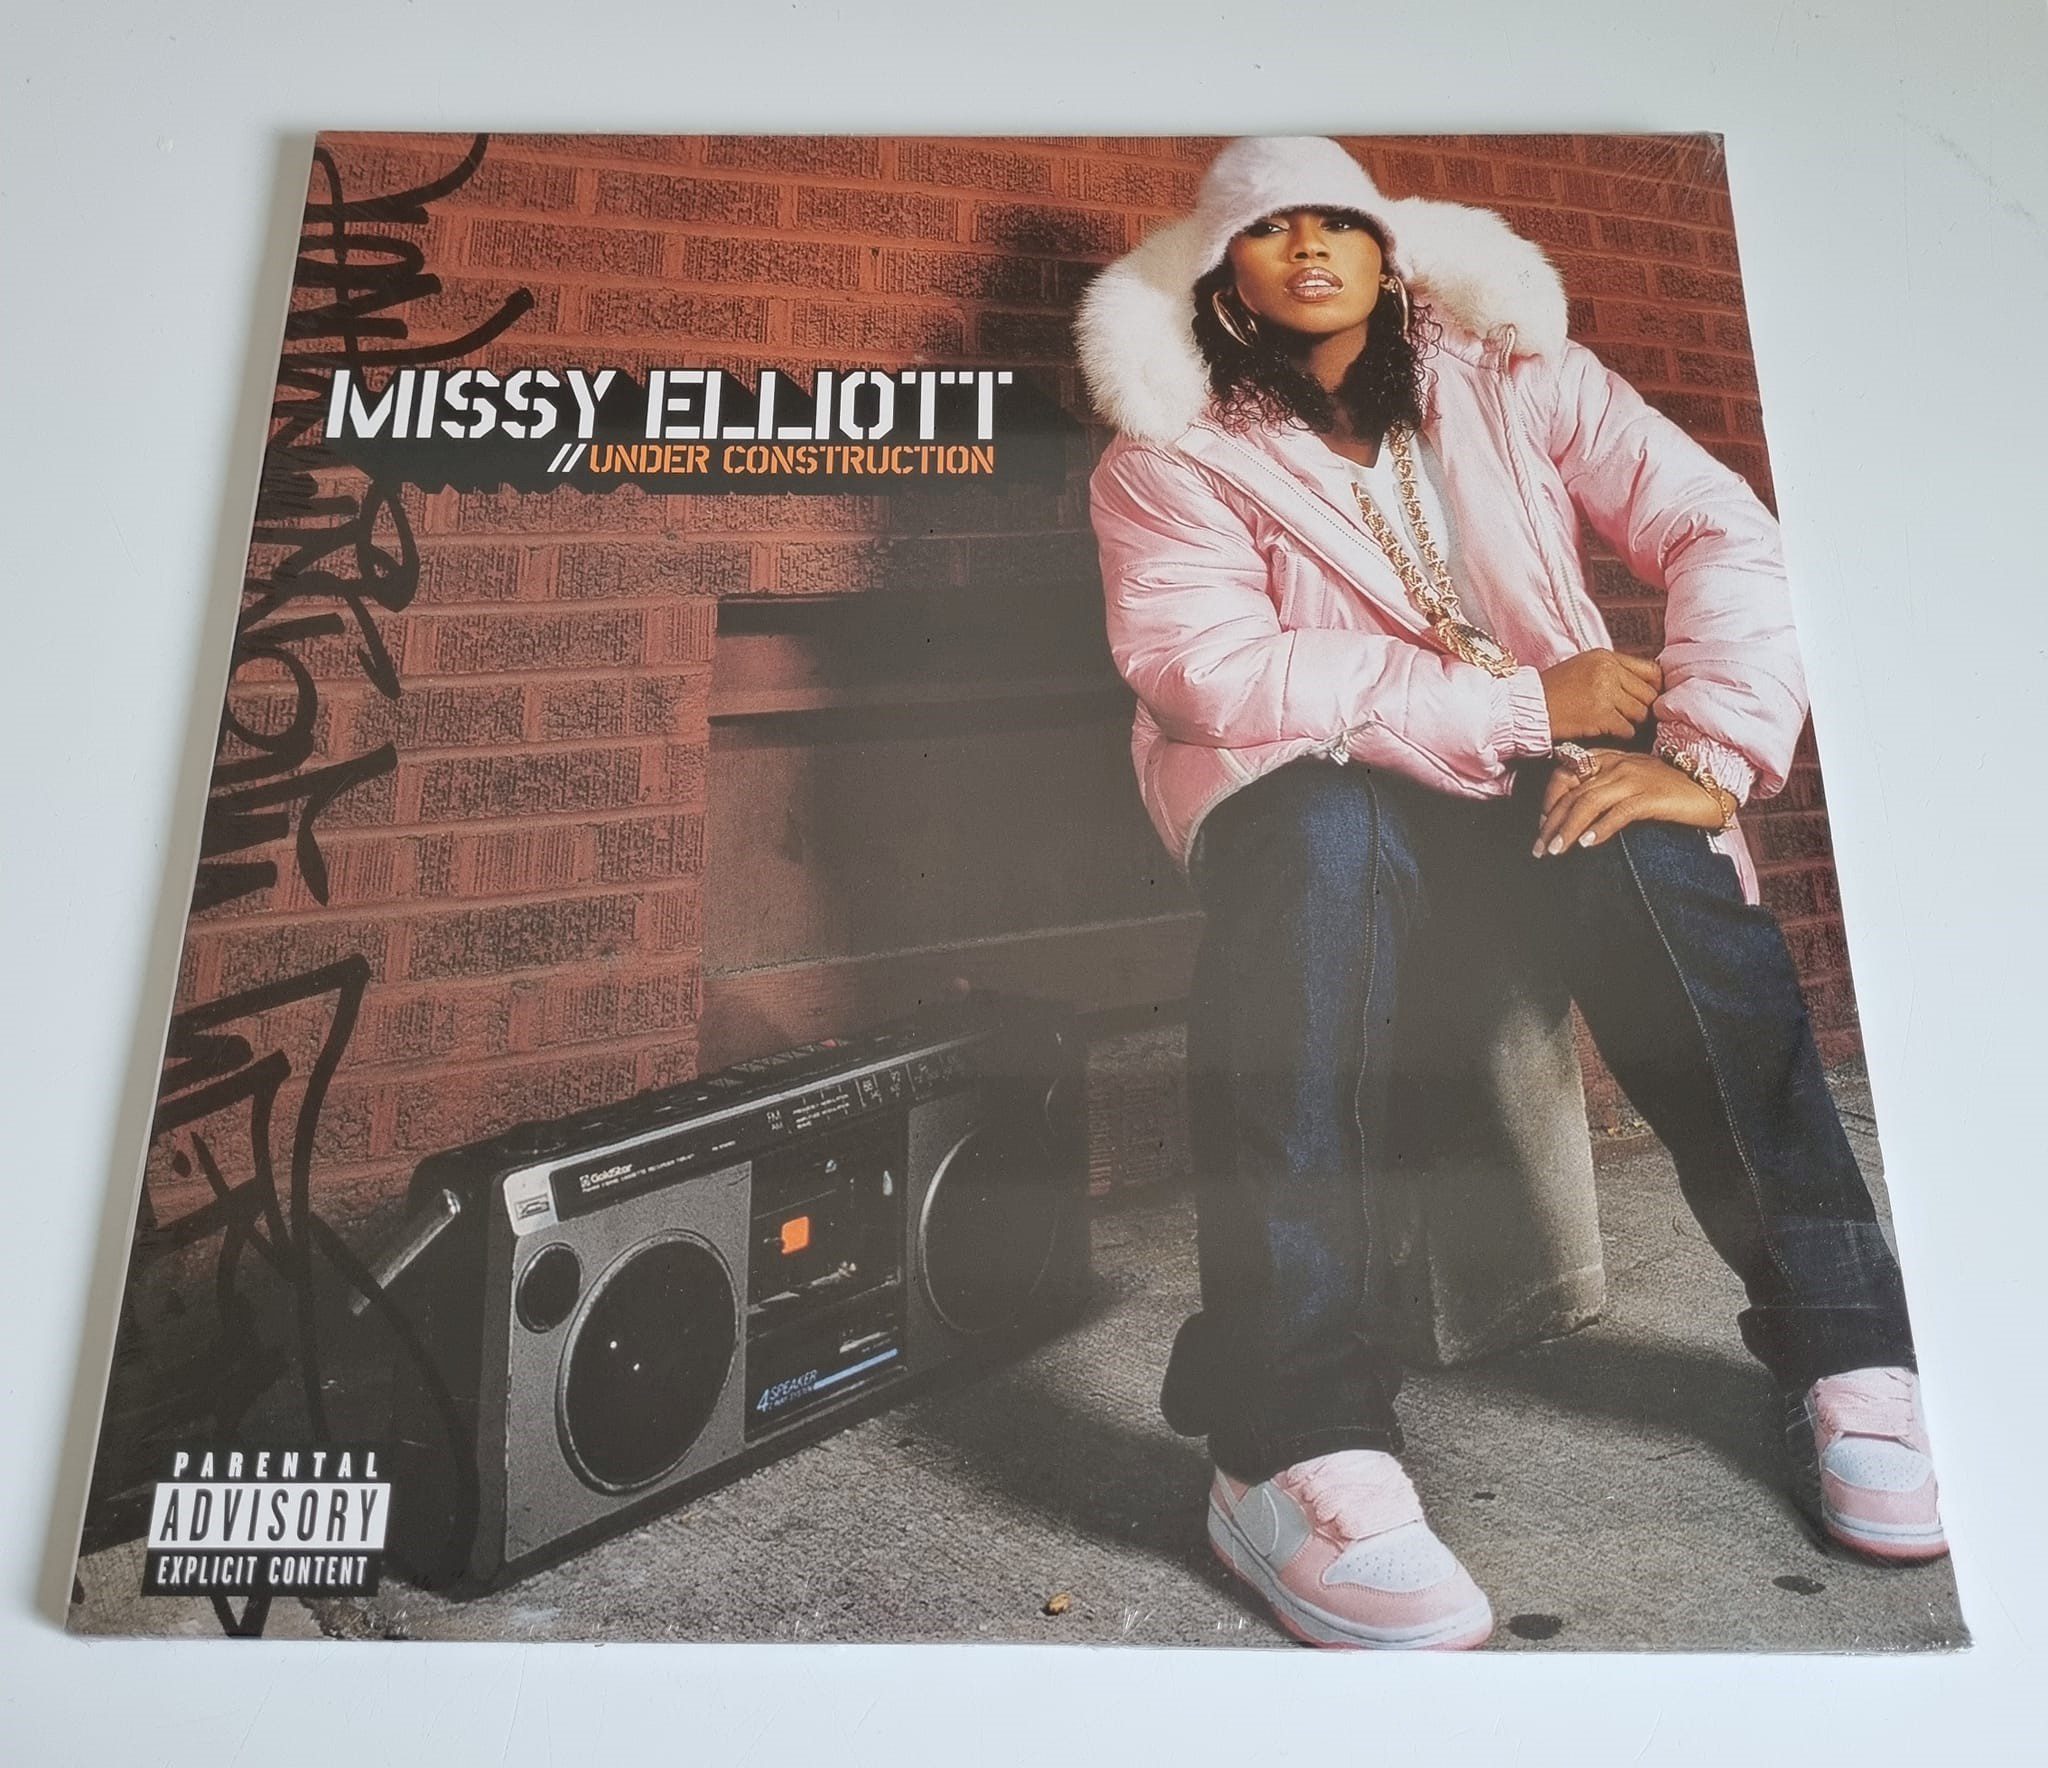 Buy this rare Missy Elliott record by clicking here